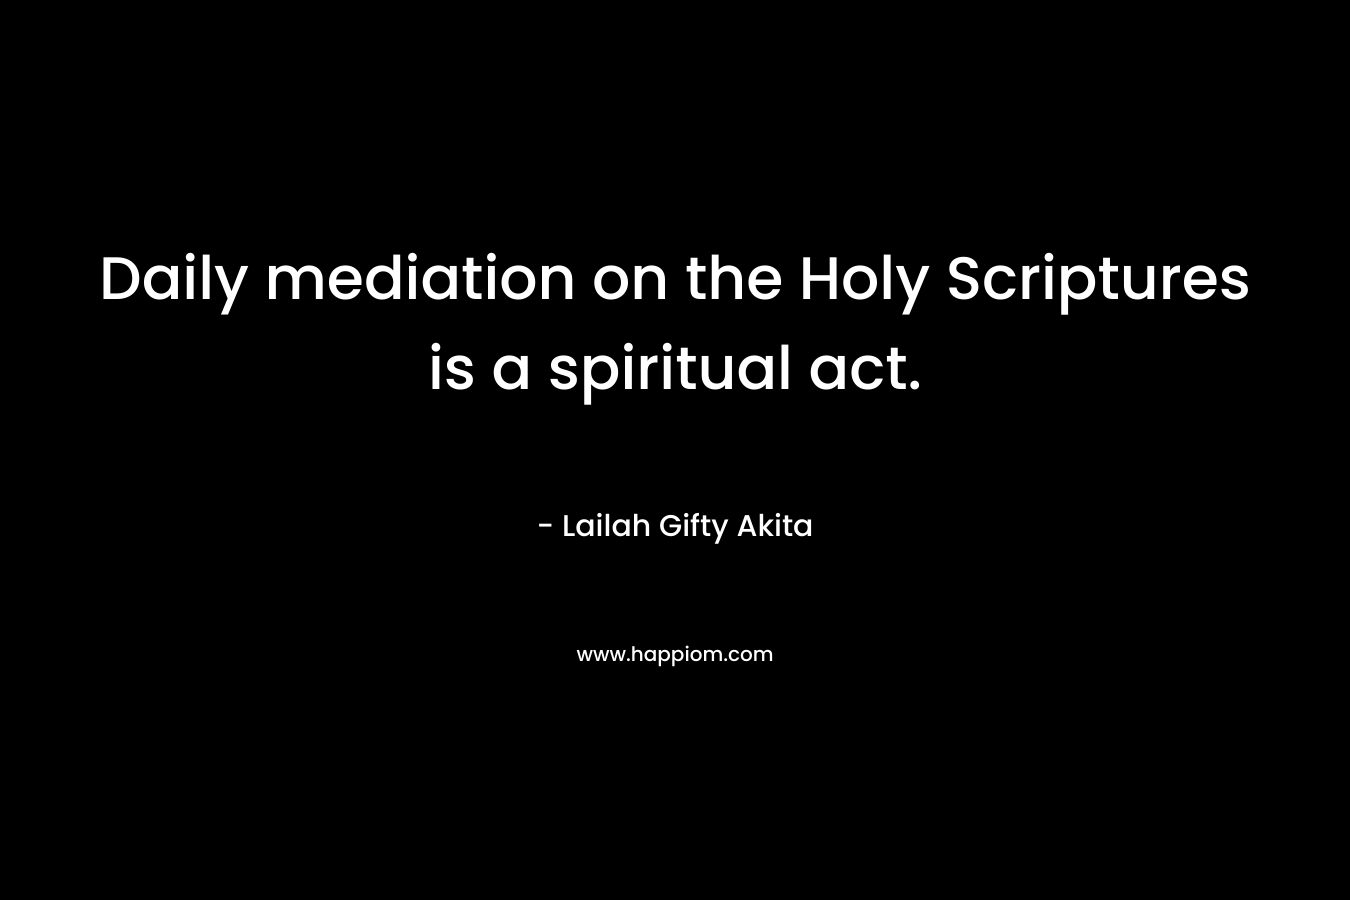 Daily mediation on the Holy Scriptures is a spiritual act.